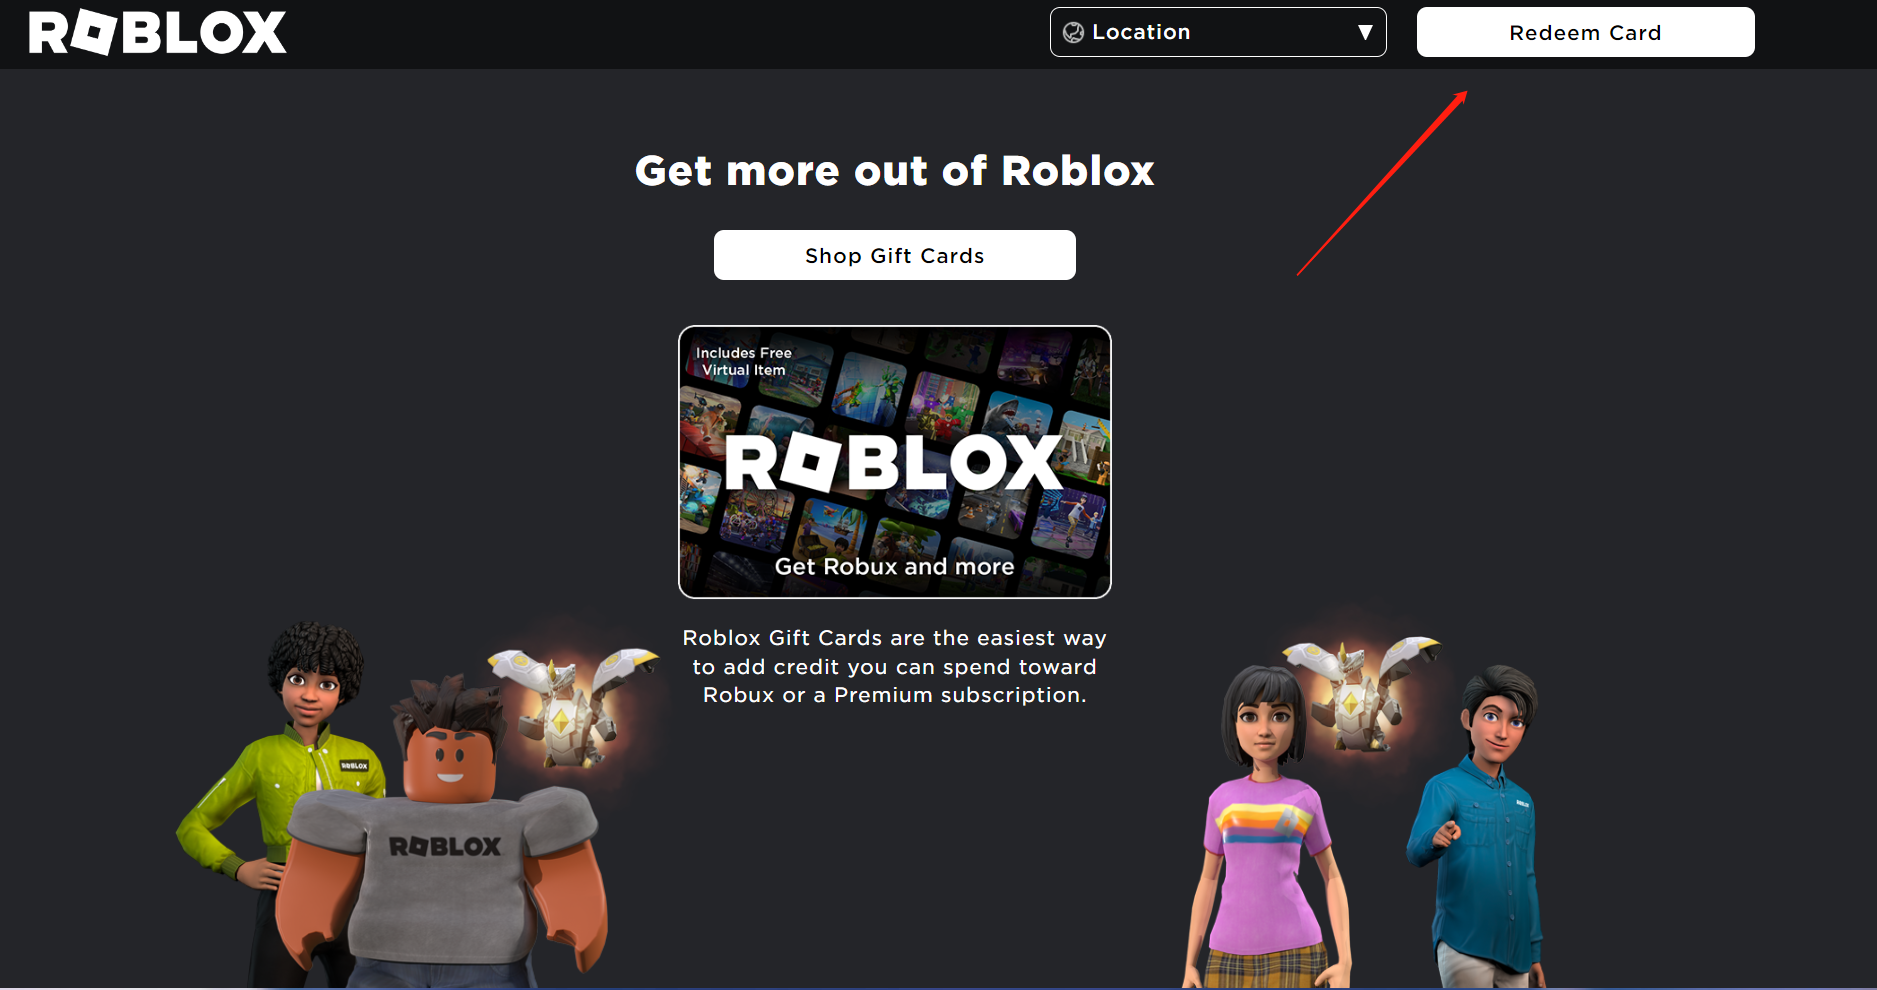 Roblox Project Ghoul codes (February 2023): Free Yen, Spins, and more